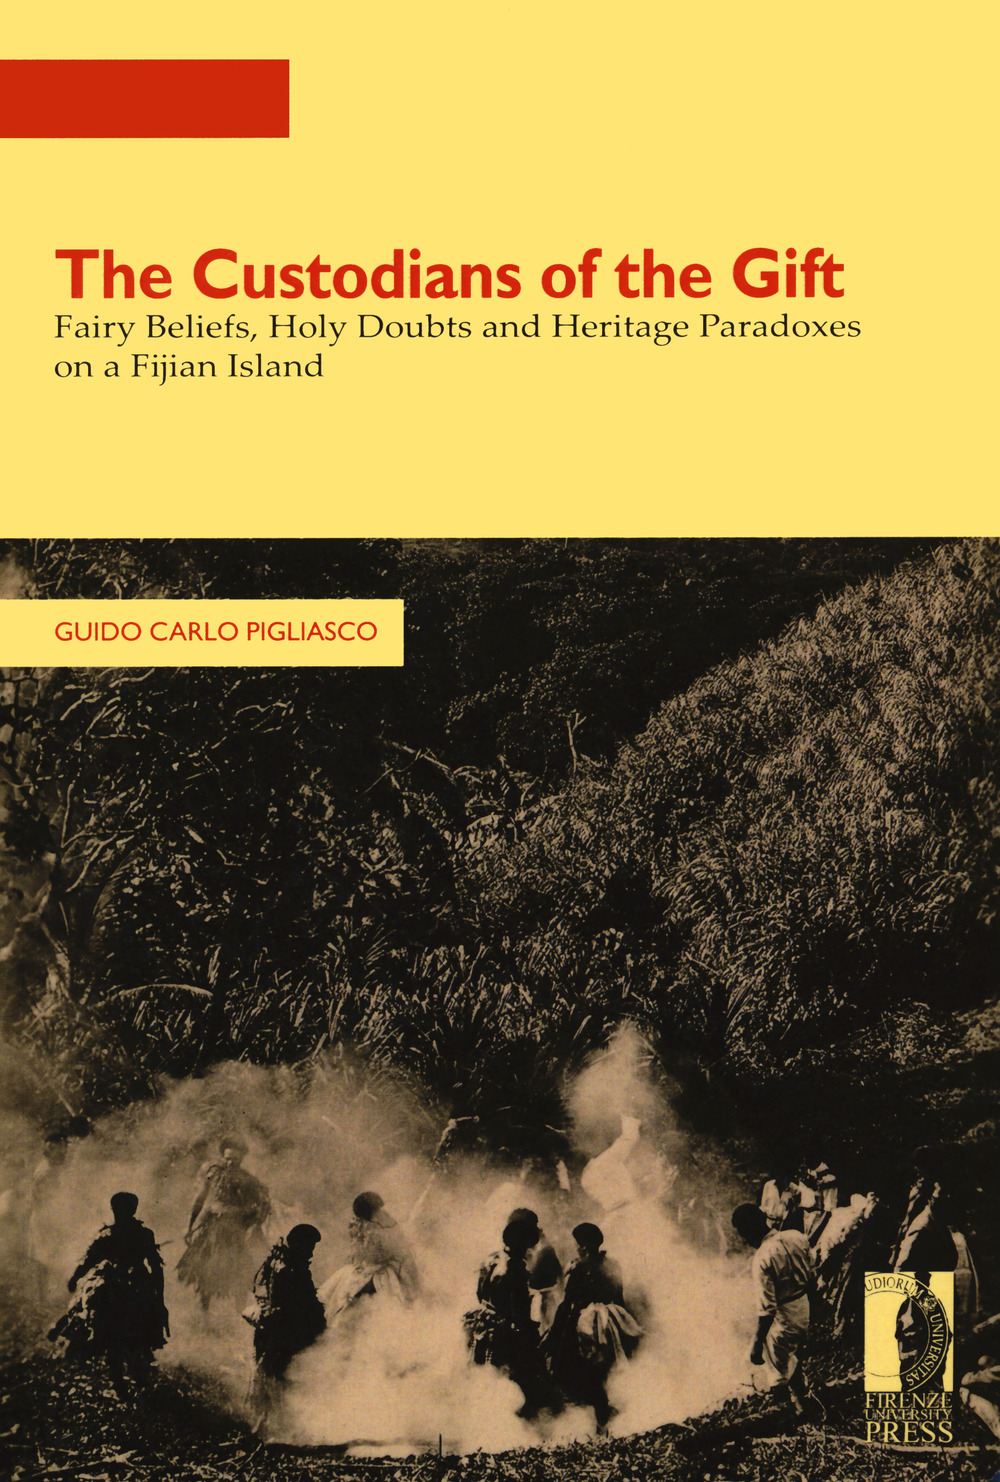 The custodians of the gift. Fairy beliefs, holy doubts and heritage paradoxes on a Fijian Island